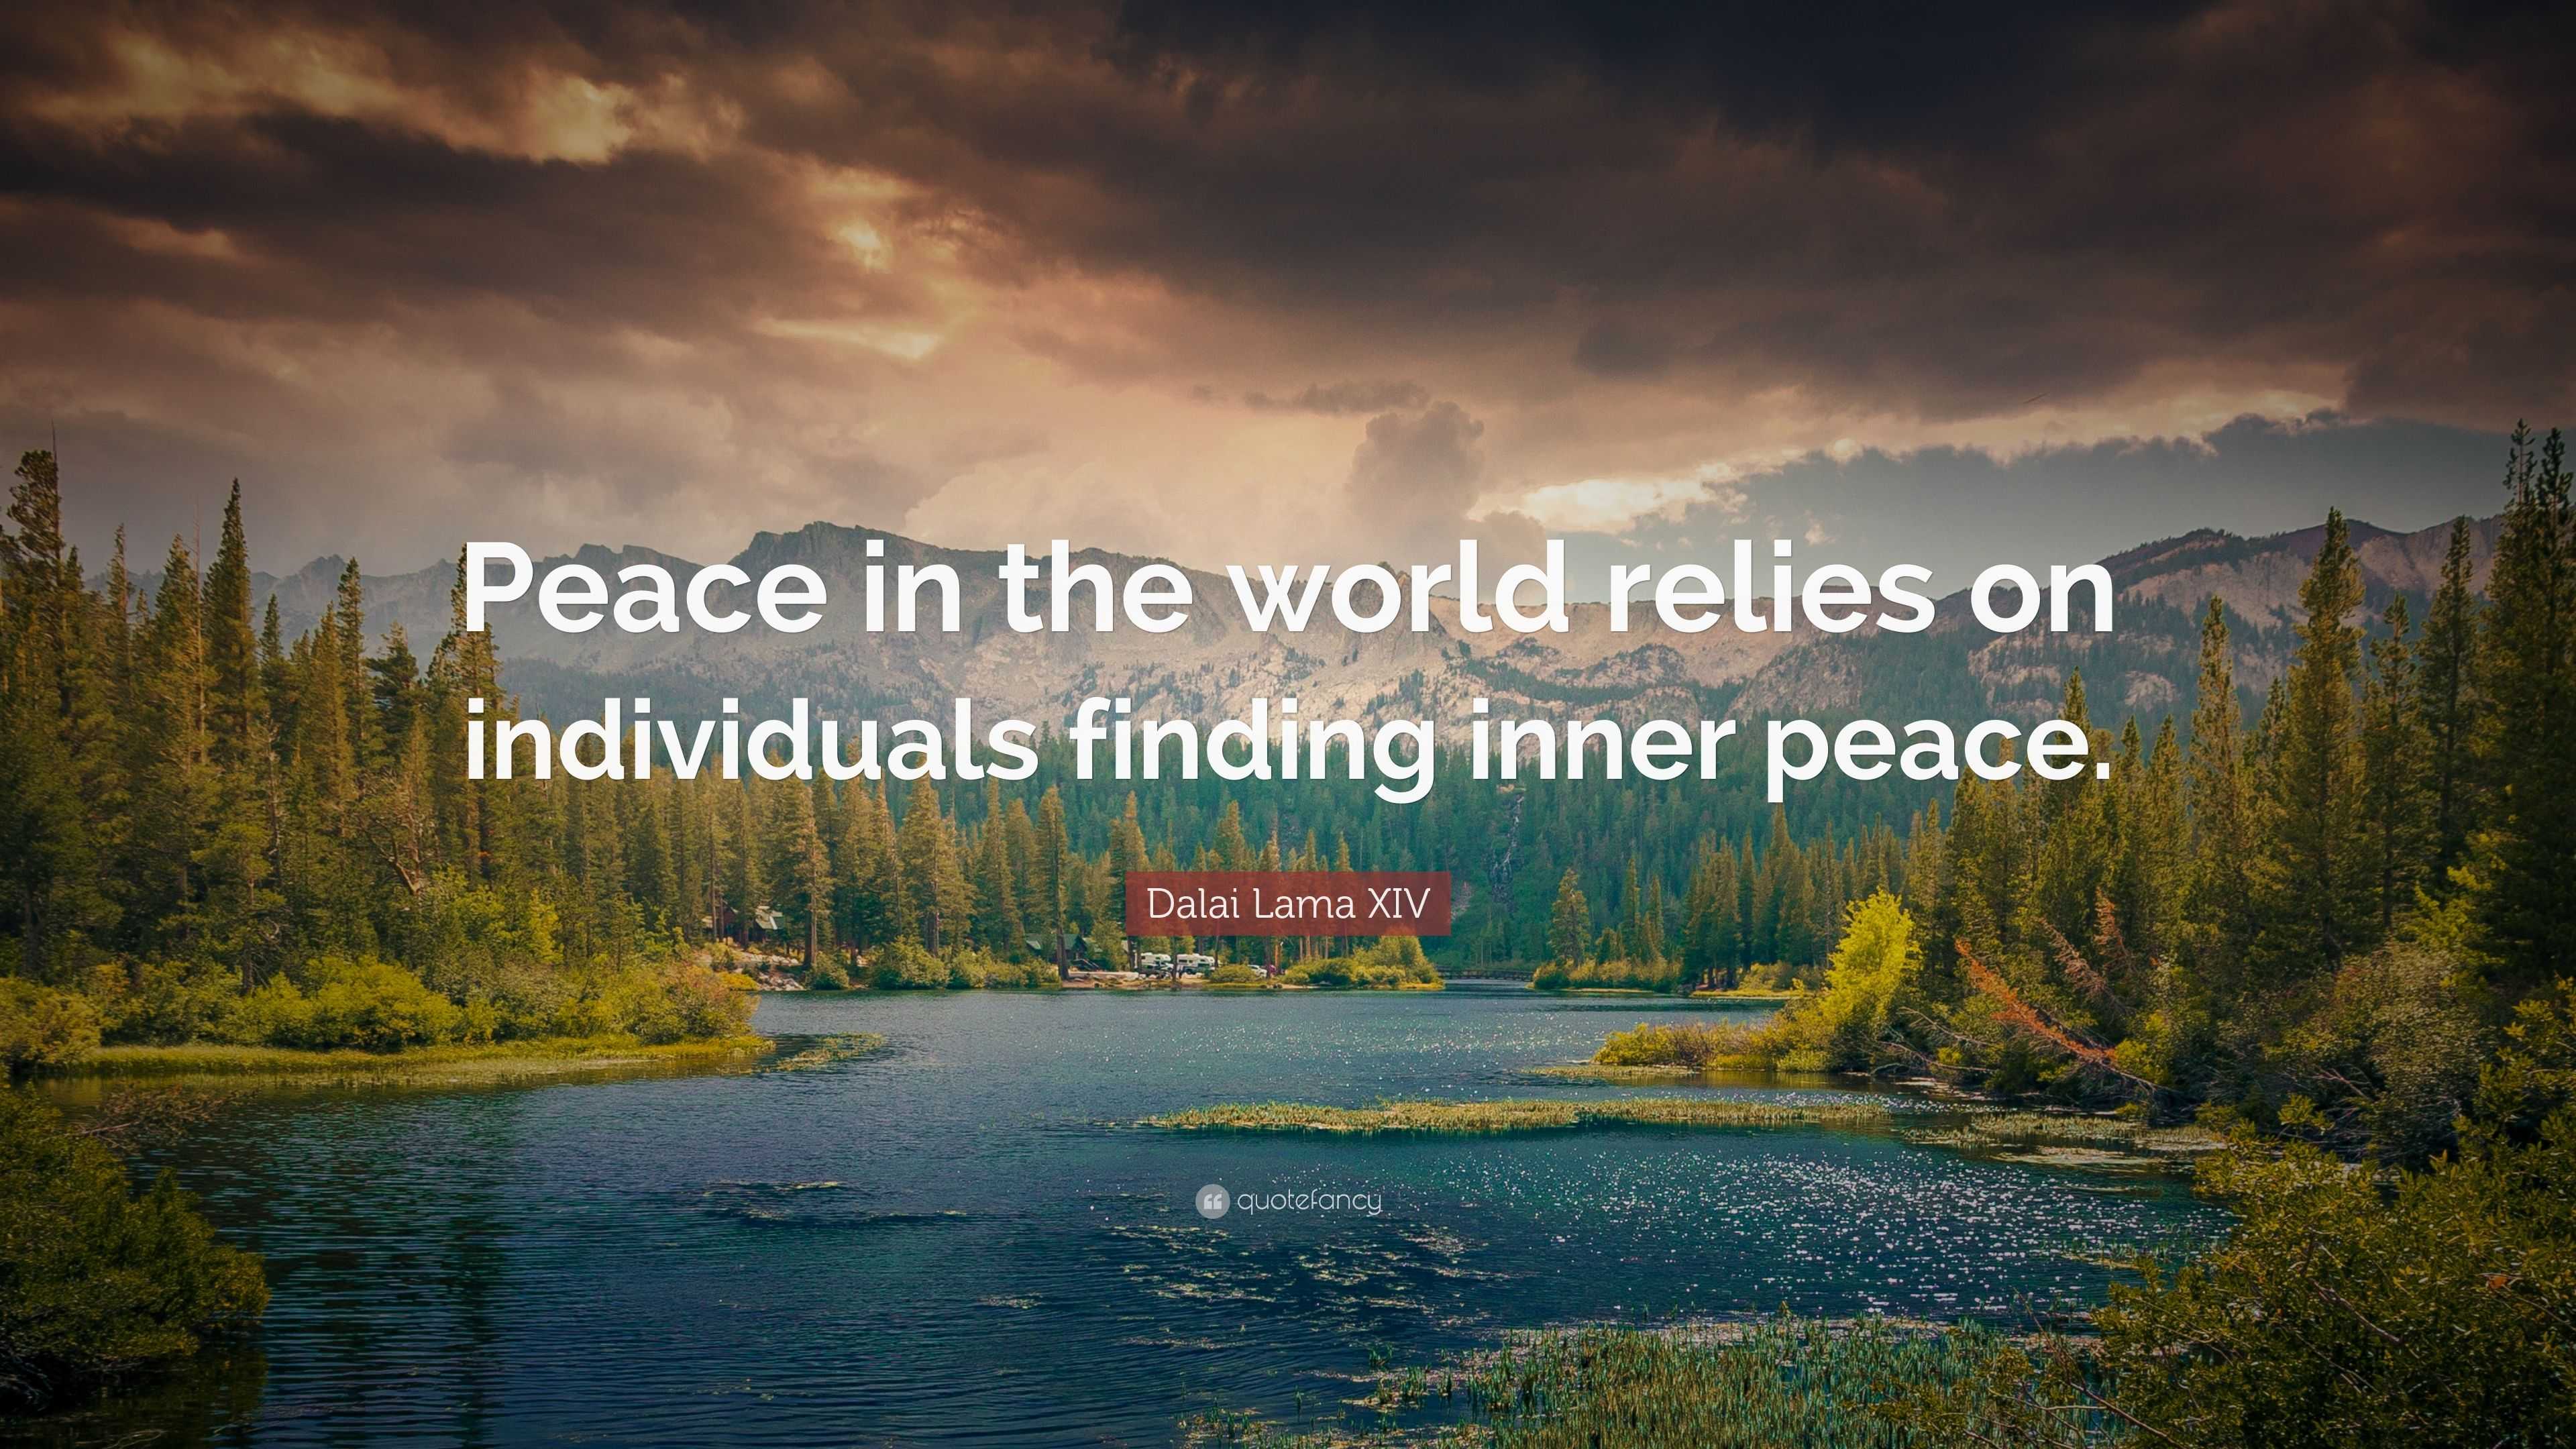 Dalai Lama Xiv Quote Peace In The World Relies On Individuals Finding Inner Peace